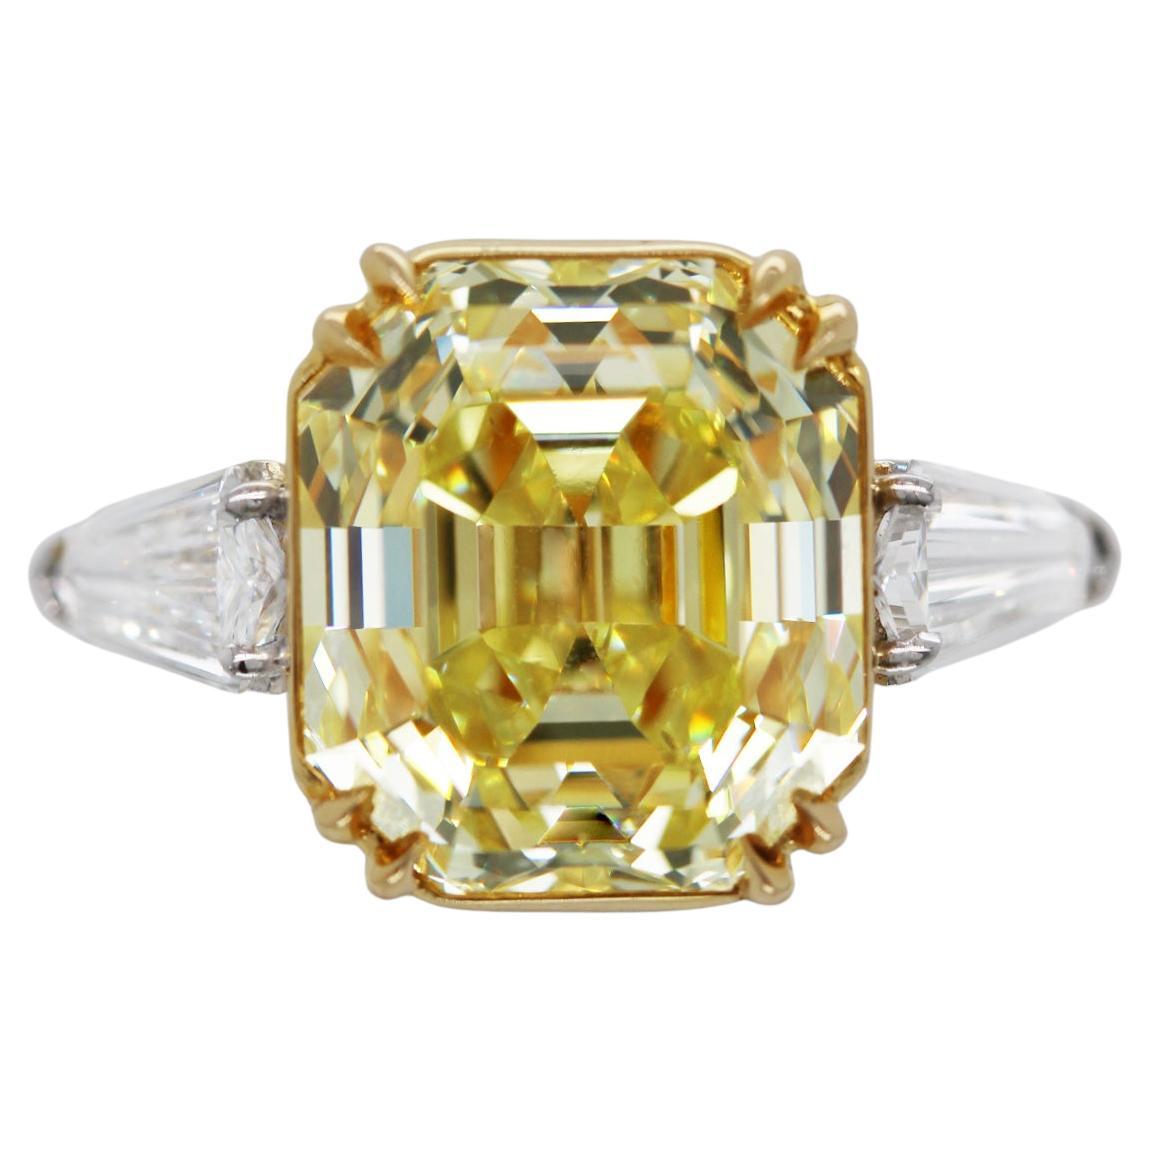 An elegant 11.71 carat Fancy Intense Yellow emerald-cut diamond engagement ring, with white bullet-cut side stones (TCW 1.15) set on 18k yellow gold and platinum. The rectangular emerald cut center stone is an evenly colored fancy intense yellow